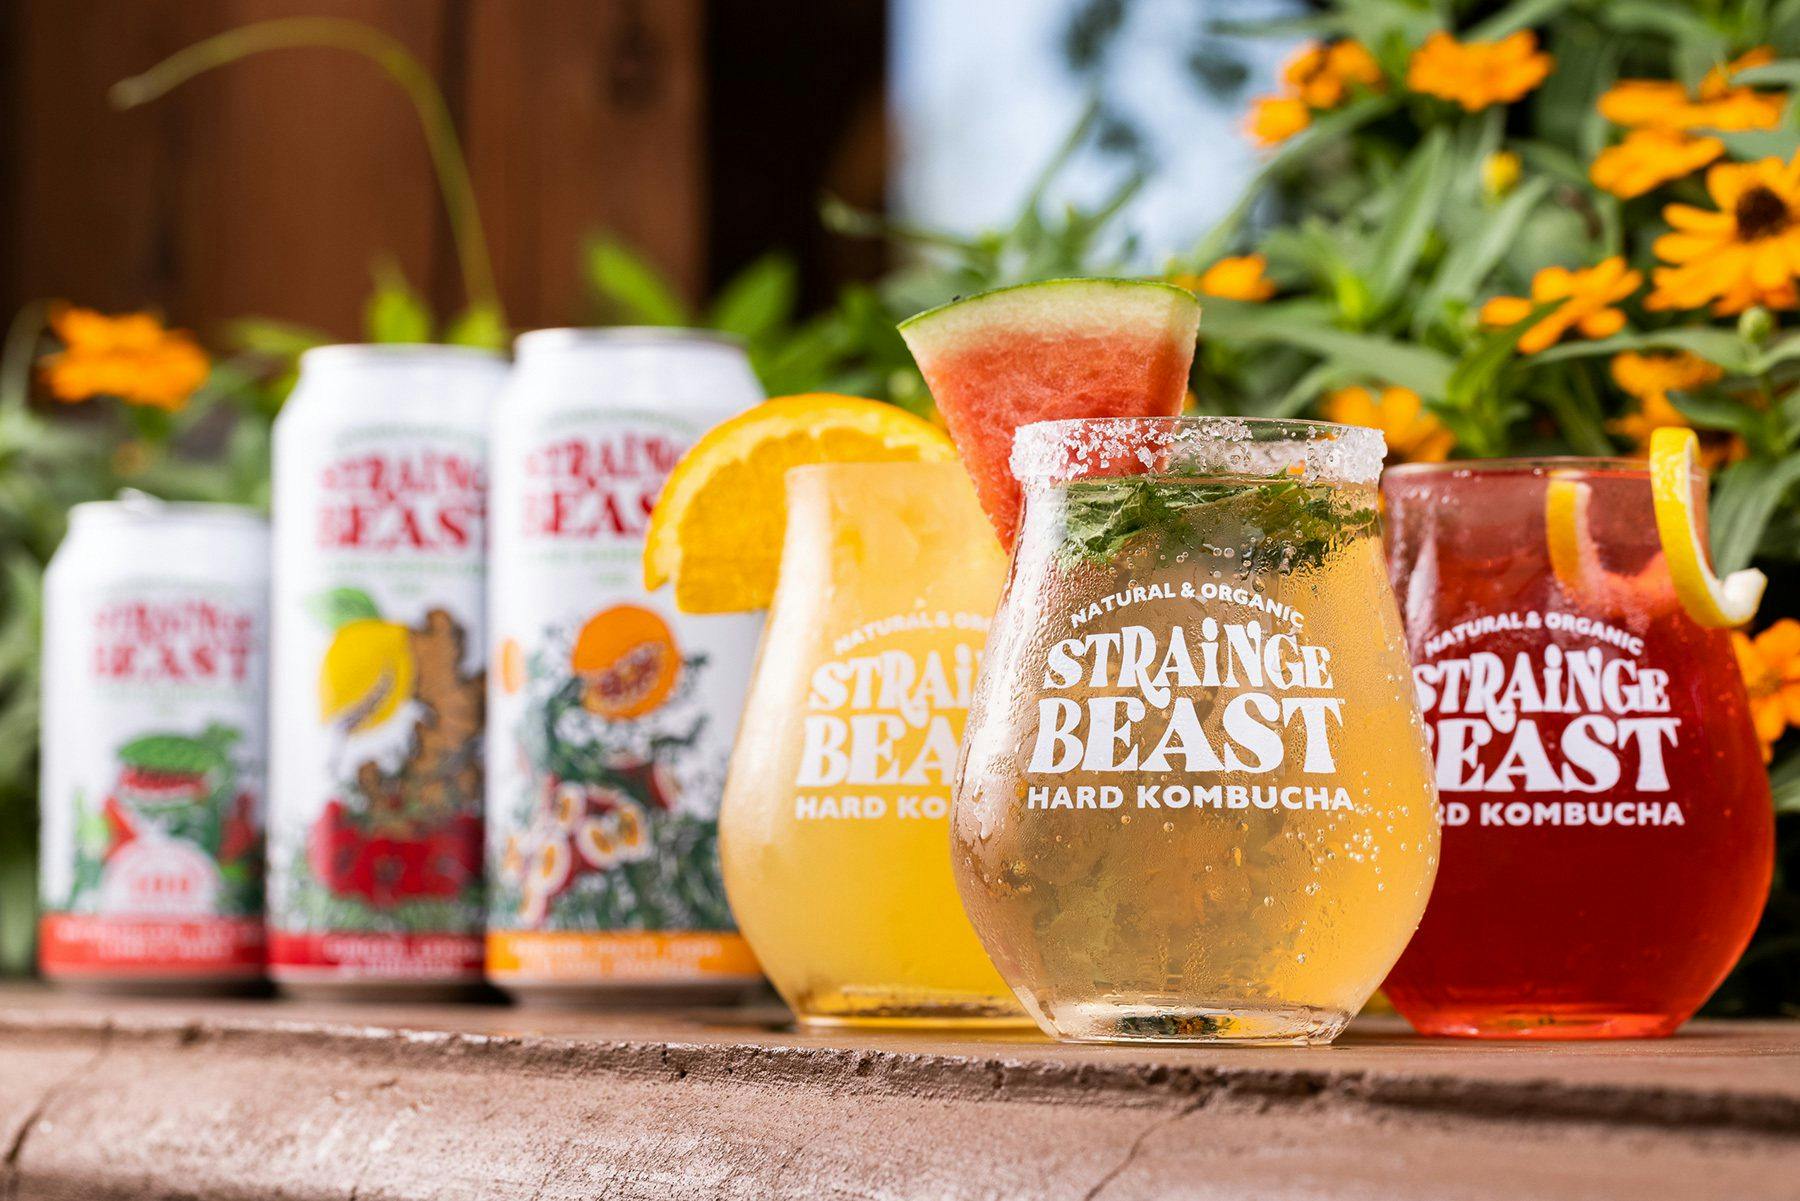 Three glasses of different Strainge Beast flavors, all garnished with fruit